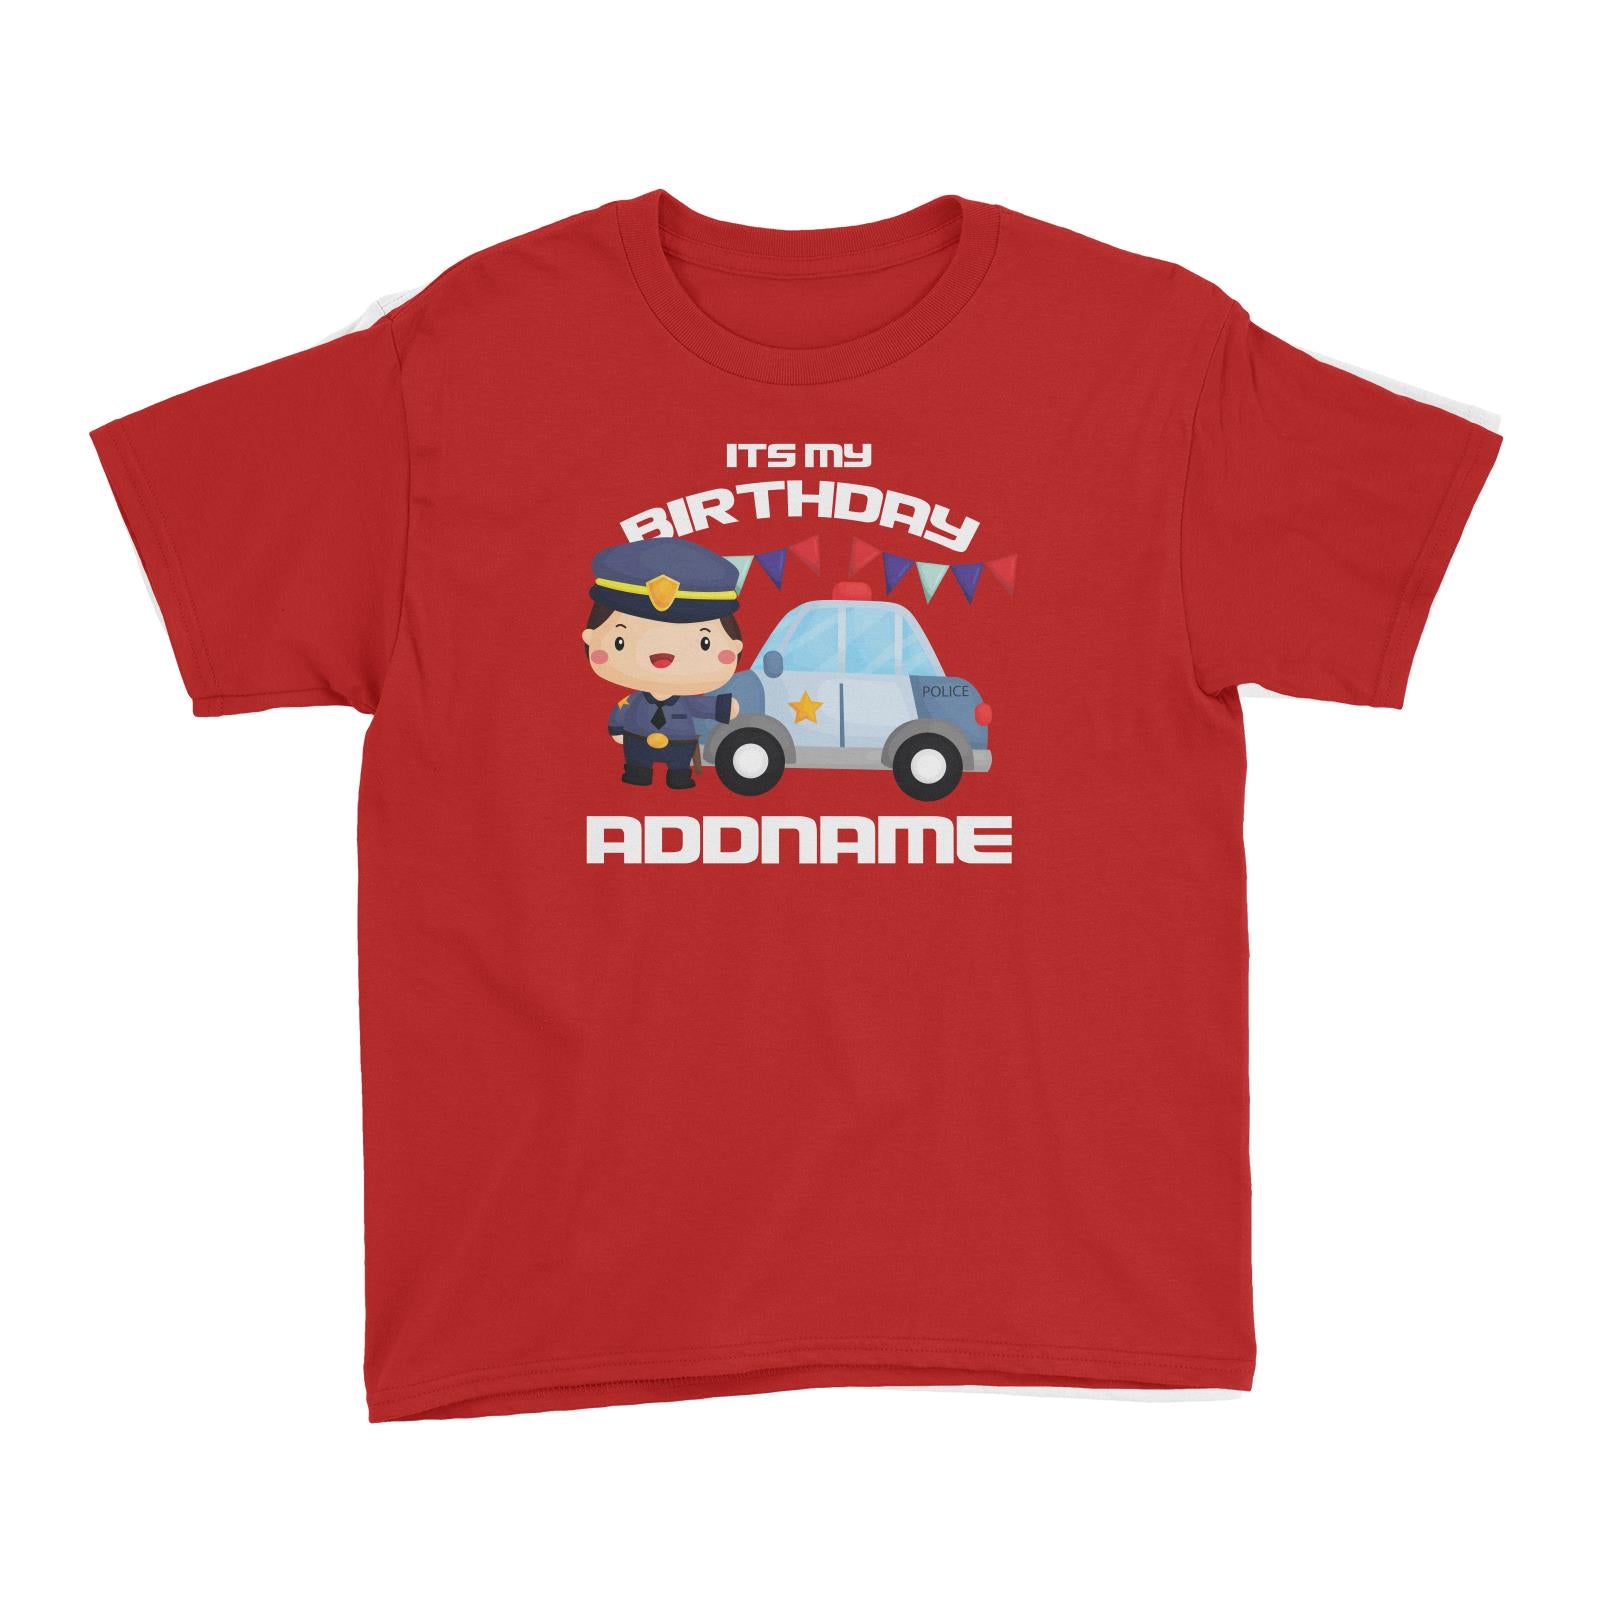 Birthday Police Officer Boy In Suit With Police Car Its My Birthday Addname Kid's T-Shirt